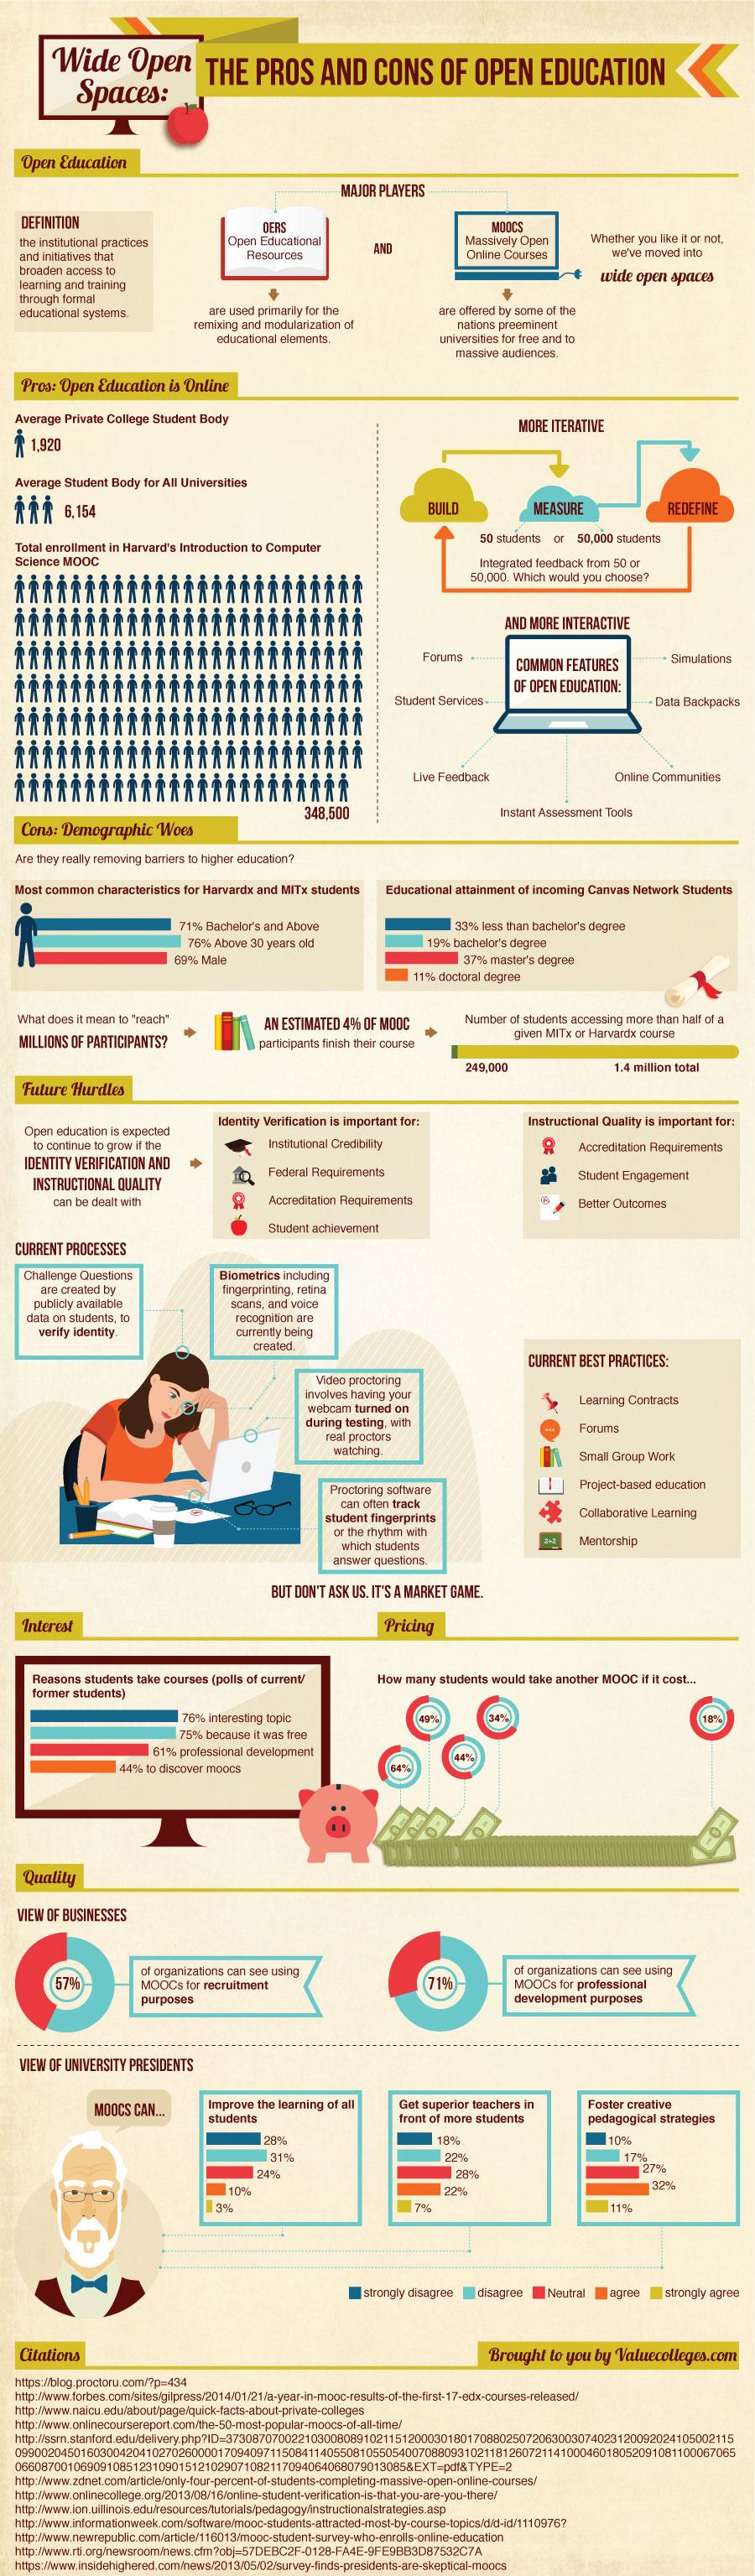 Open-education-infographic